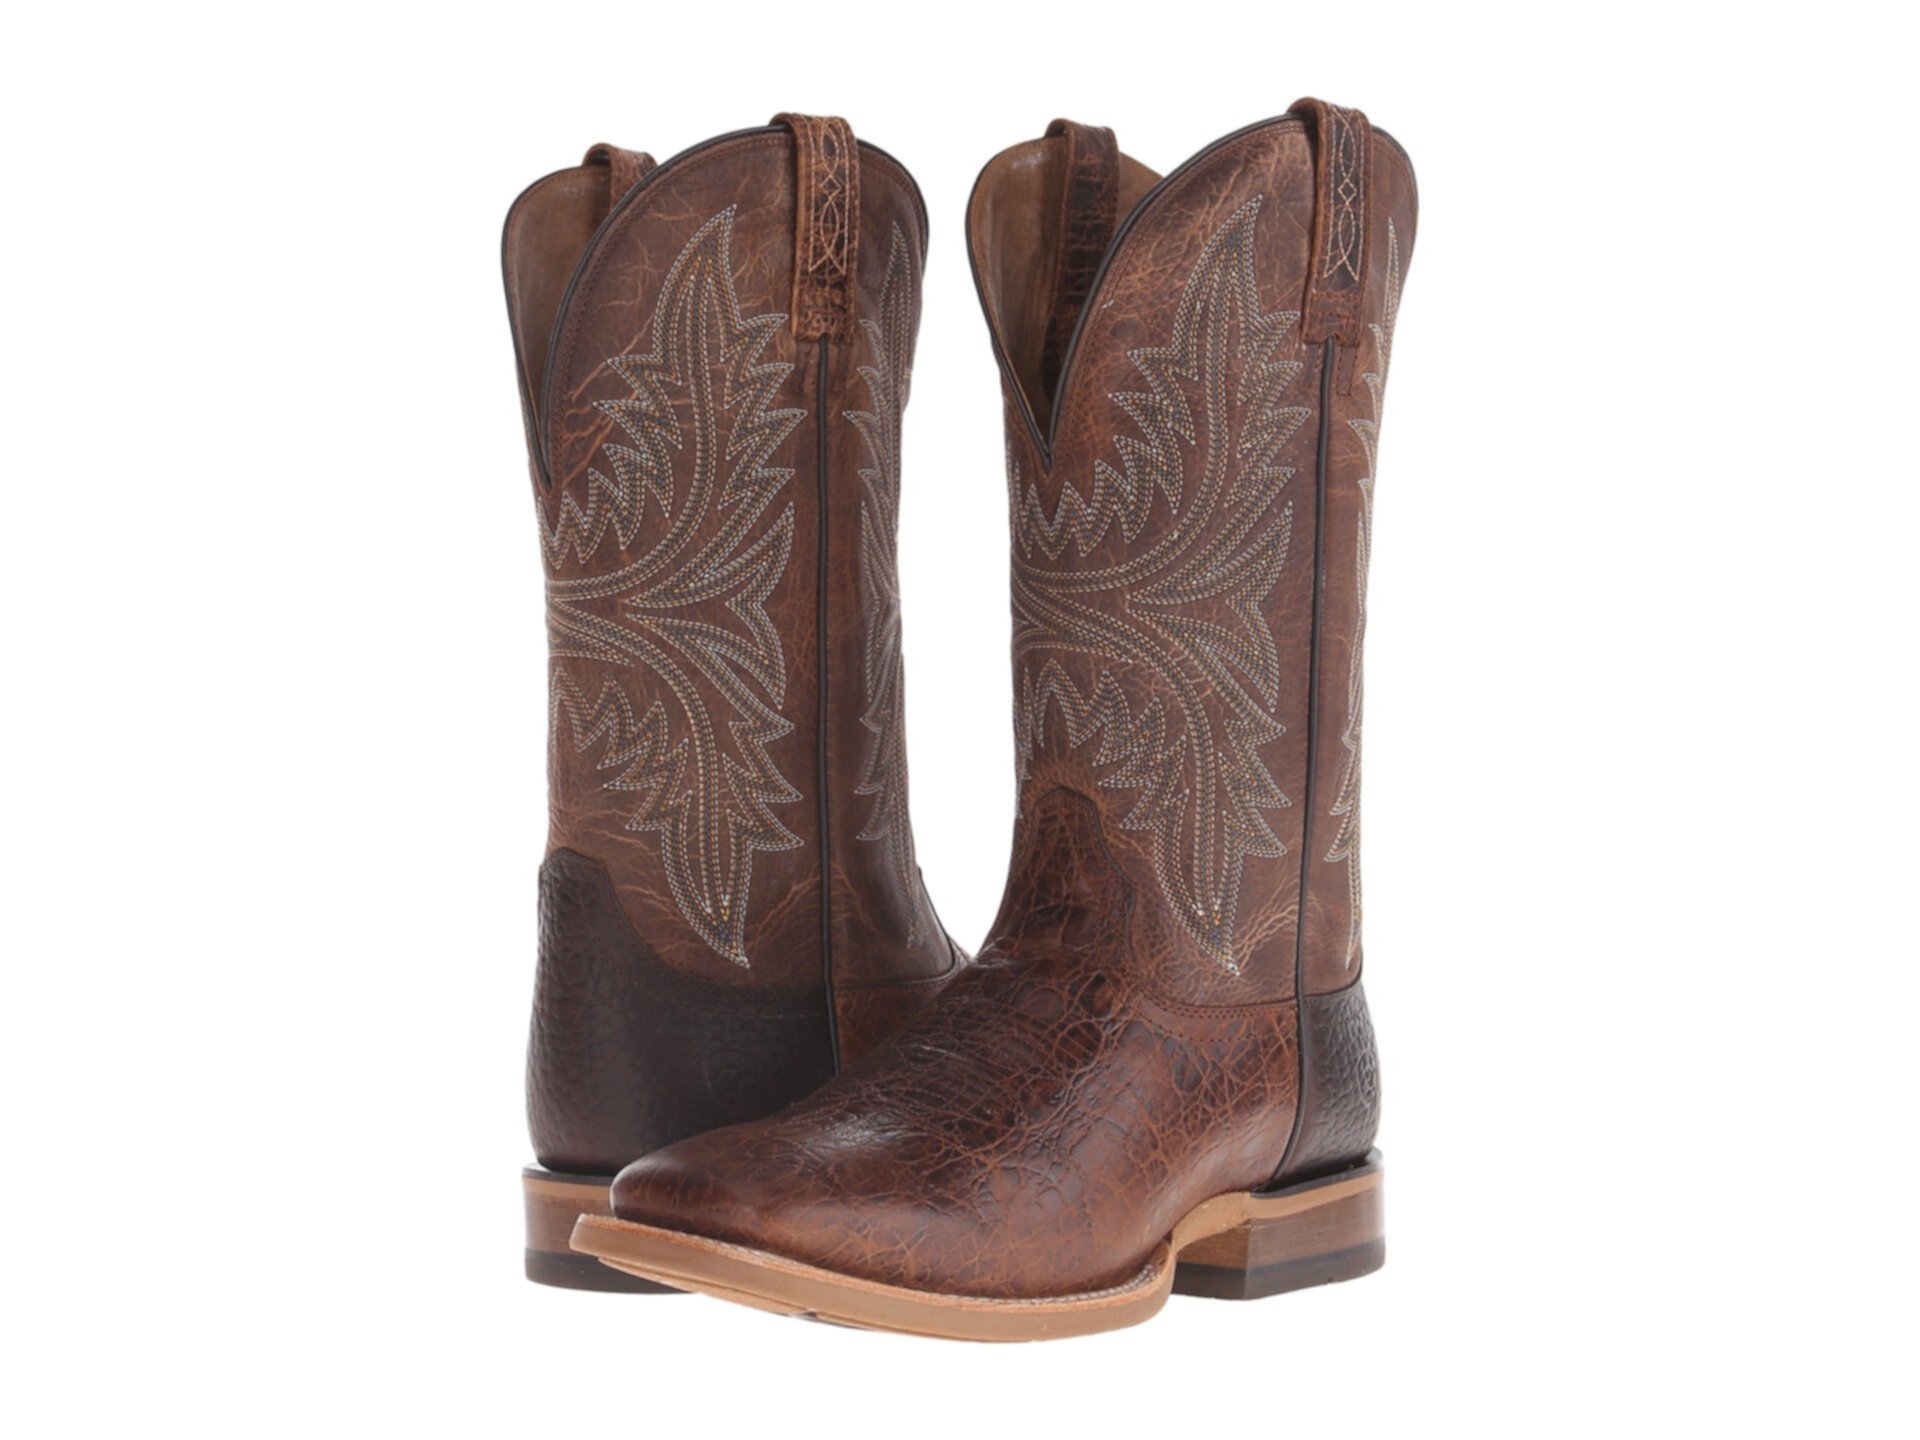 Cowhand Ariat